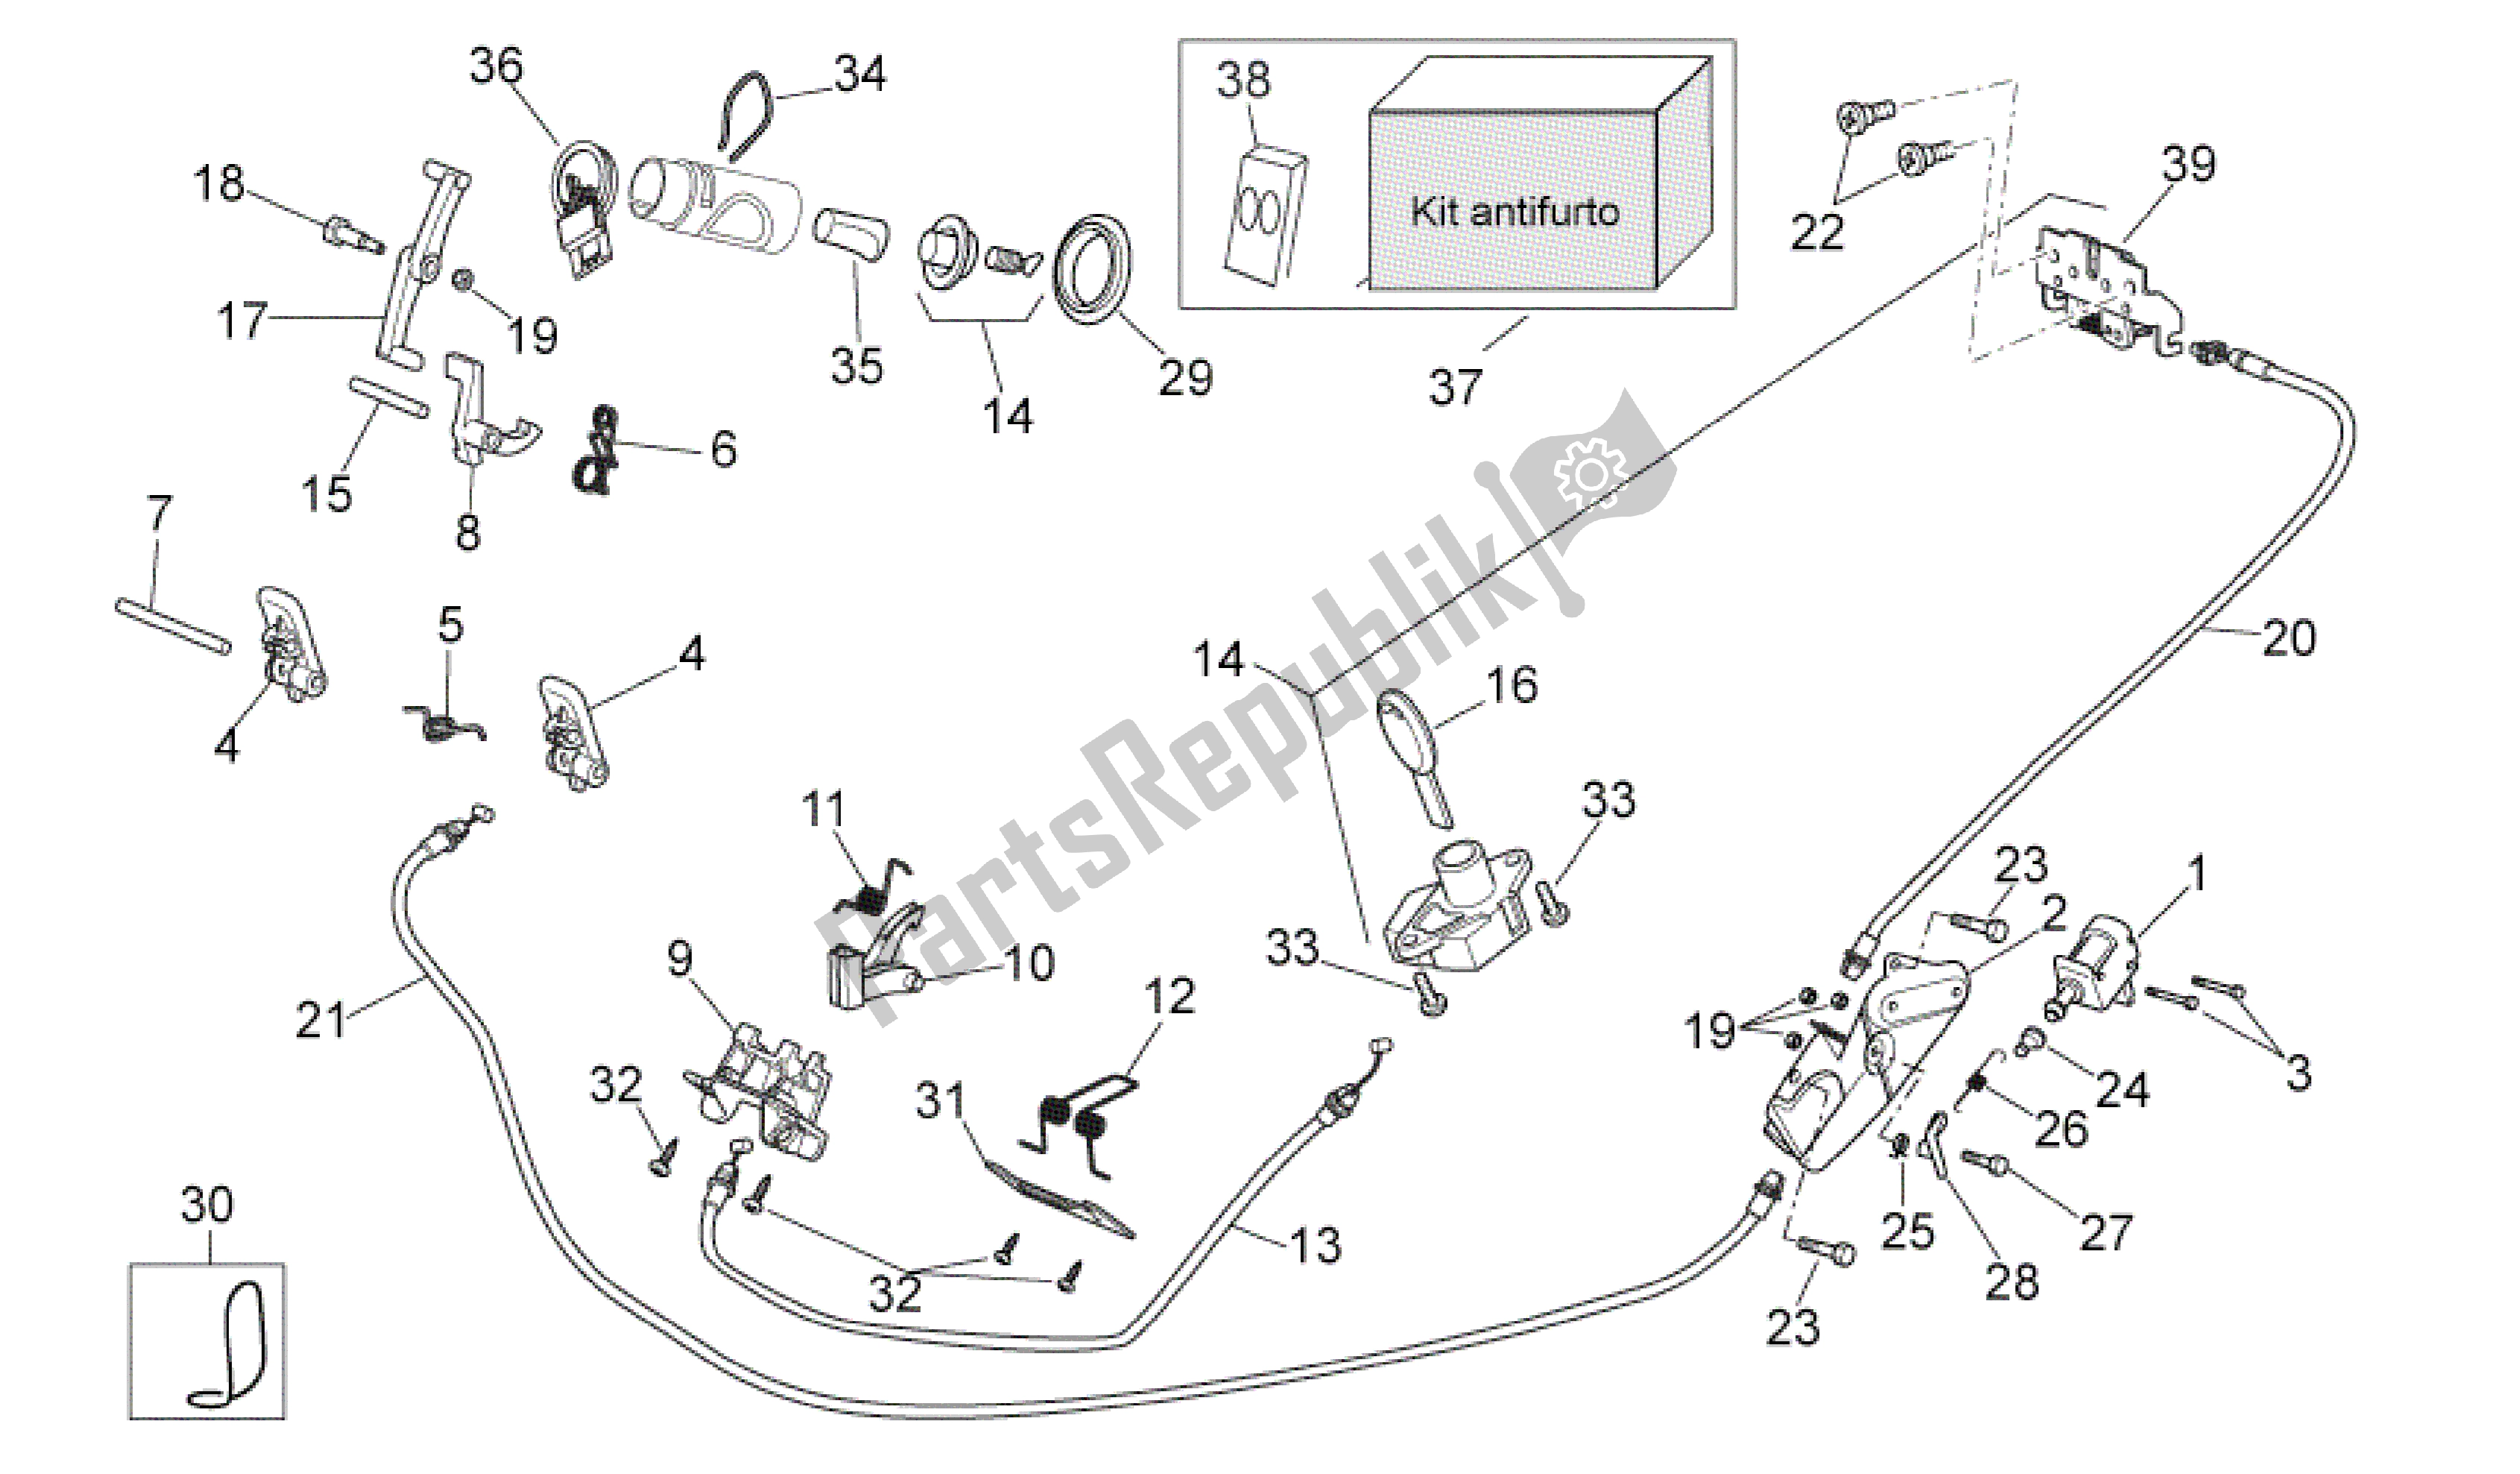 All parts for the Lock Hardware Kit of the Aprilia Scarabeo 400 2006 - 2008